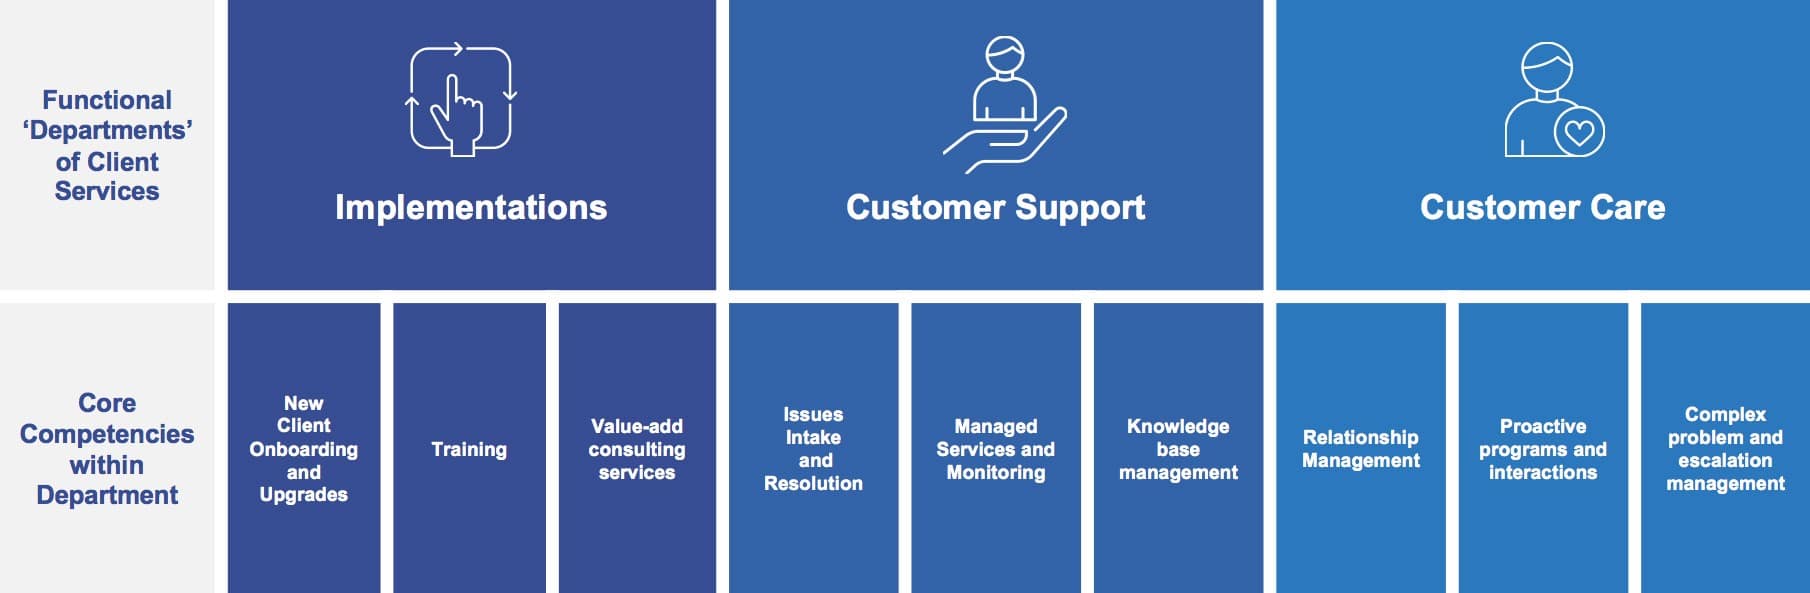 Client Services Organization – How We Deliver to our Customers